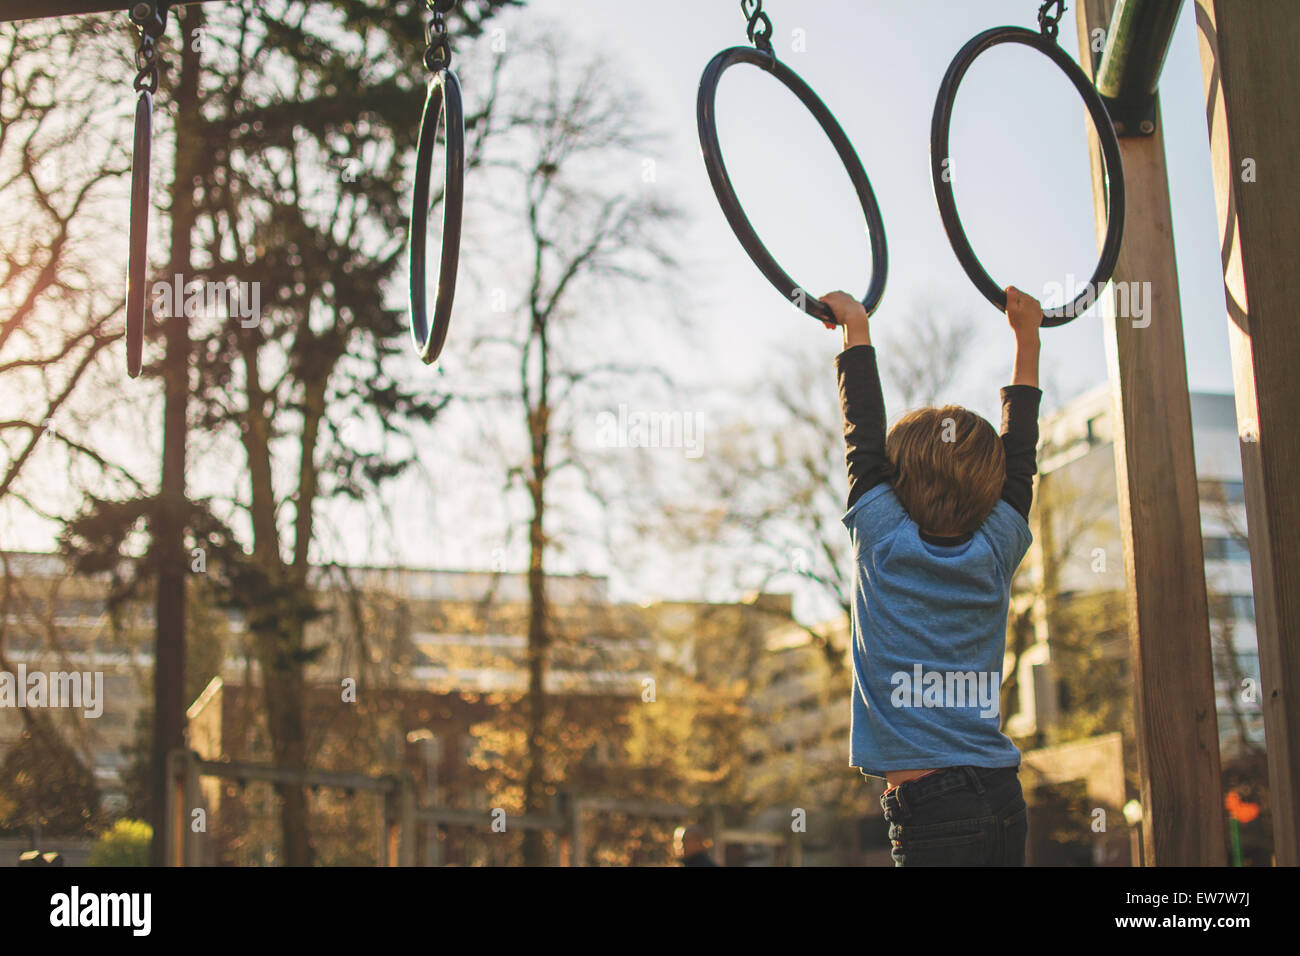 Boy hanging from rings at playground, USA Stock Photo